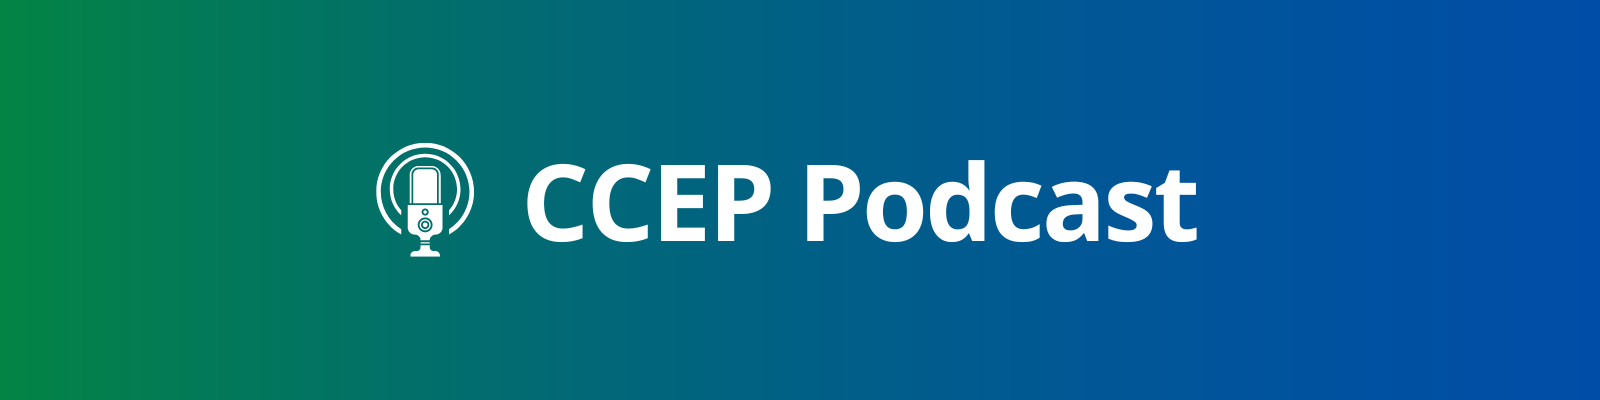 CCEP Podcast